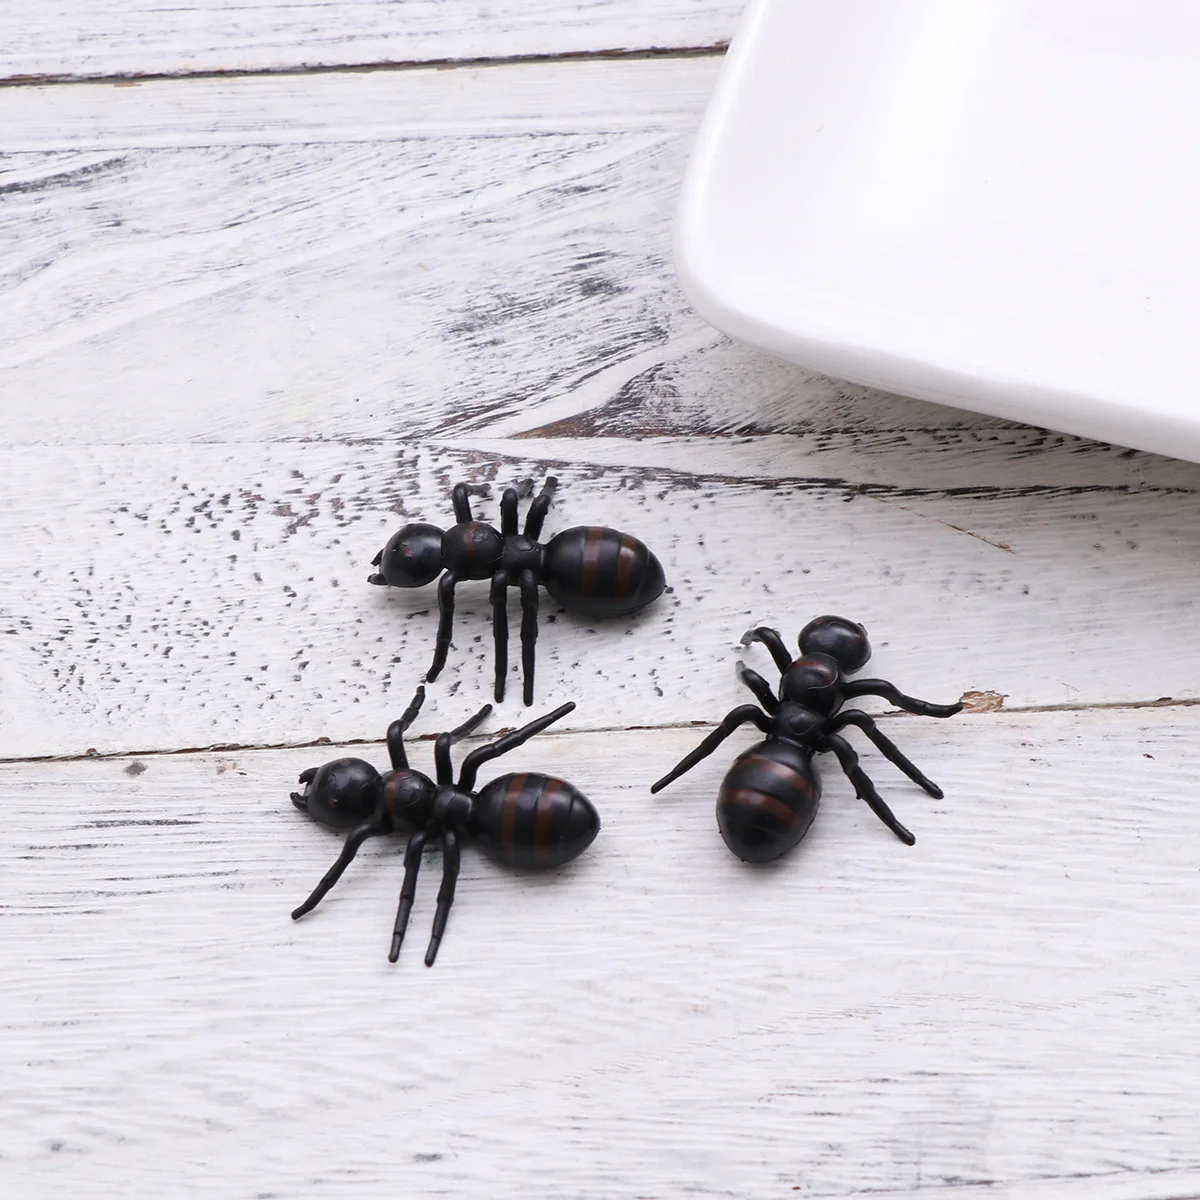 

Ants Toys Halloween Plastic Insect Fake Ant Bugs Realistic Prank Toy Picnic Props Party Insects Kids Model Black Decorations Bug